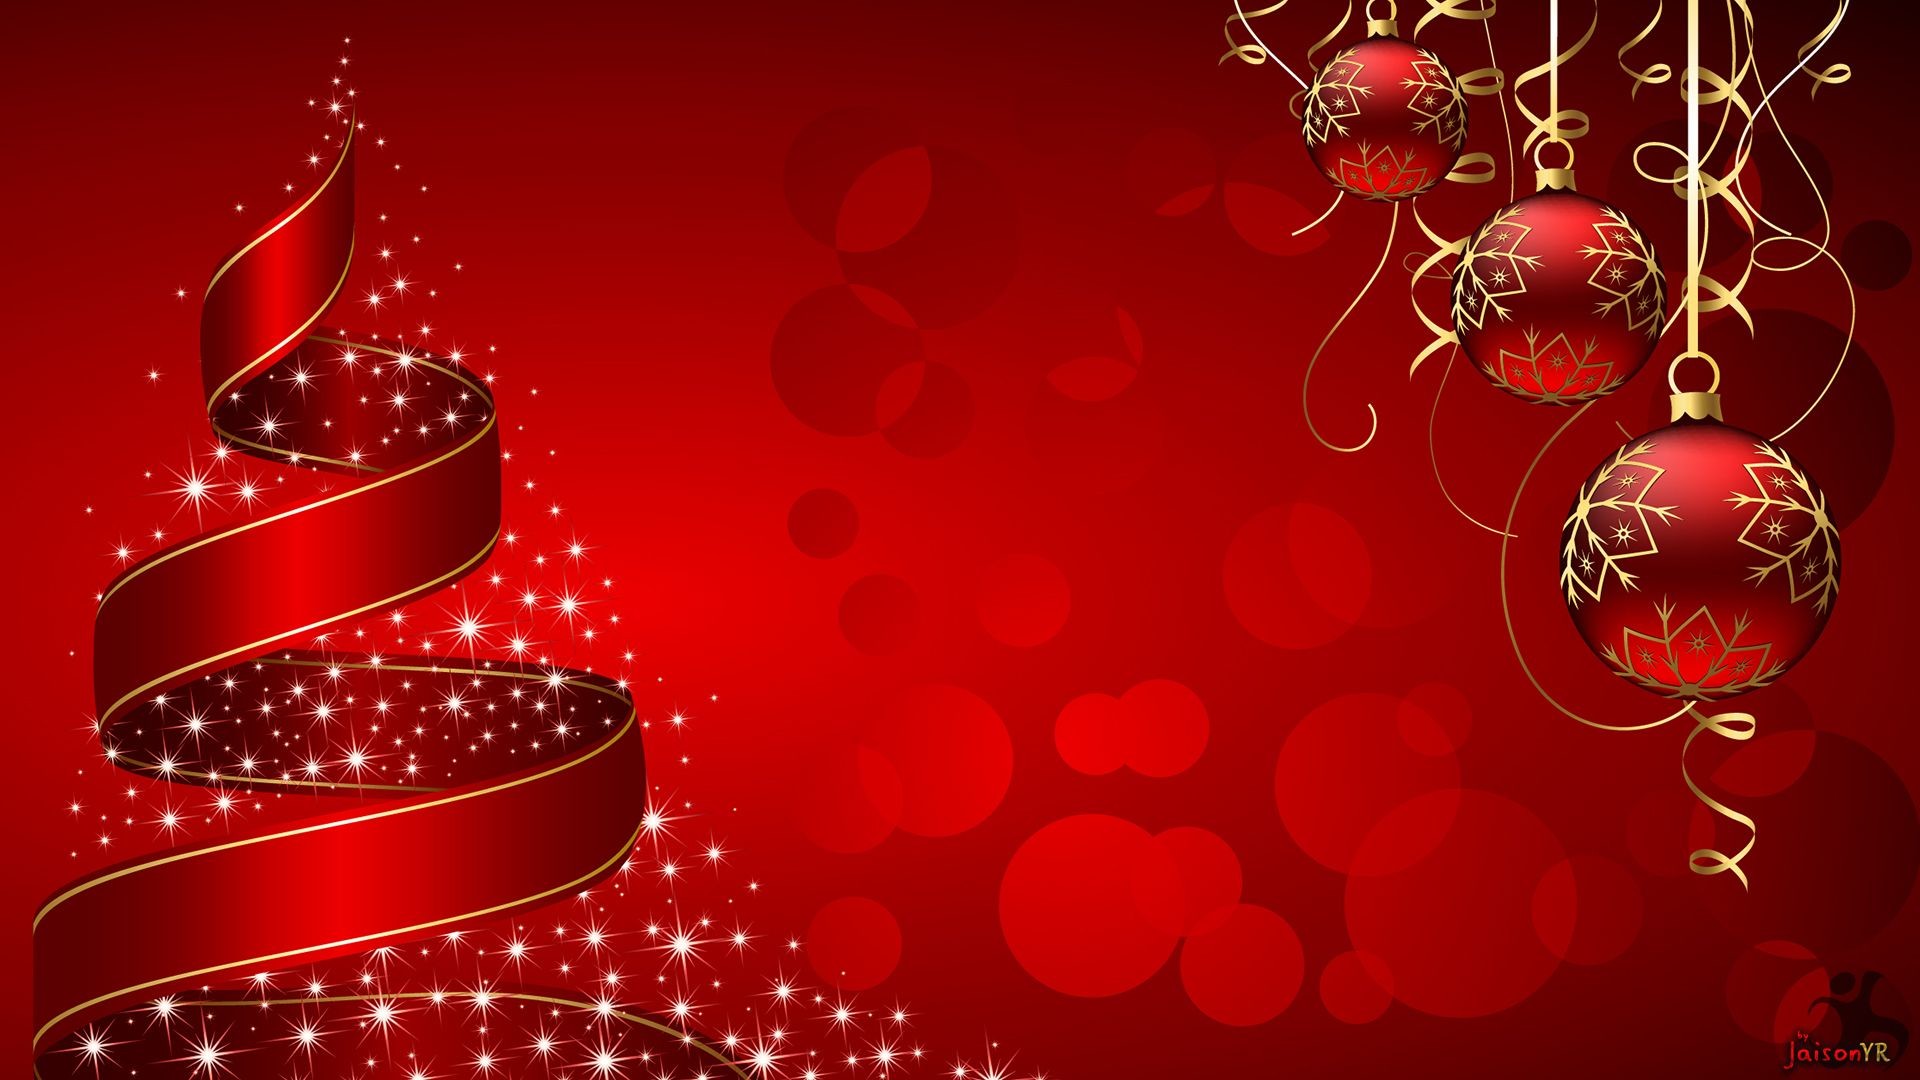 1920x1080 ... Christmas Tree And Baubles Wallpaper In Red Background free download